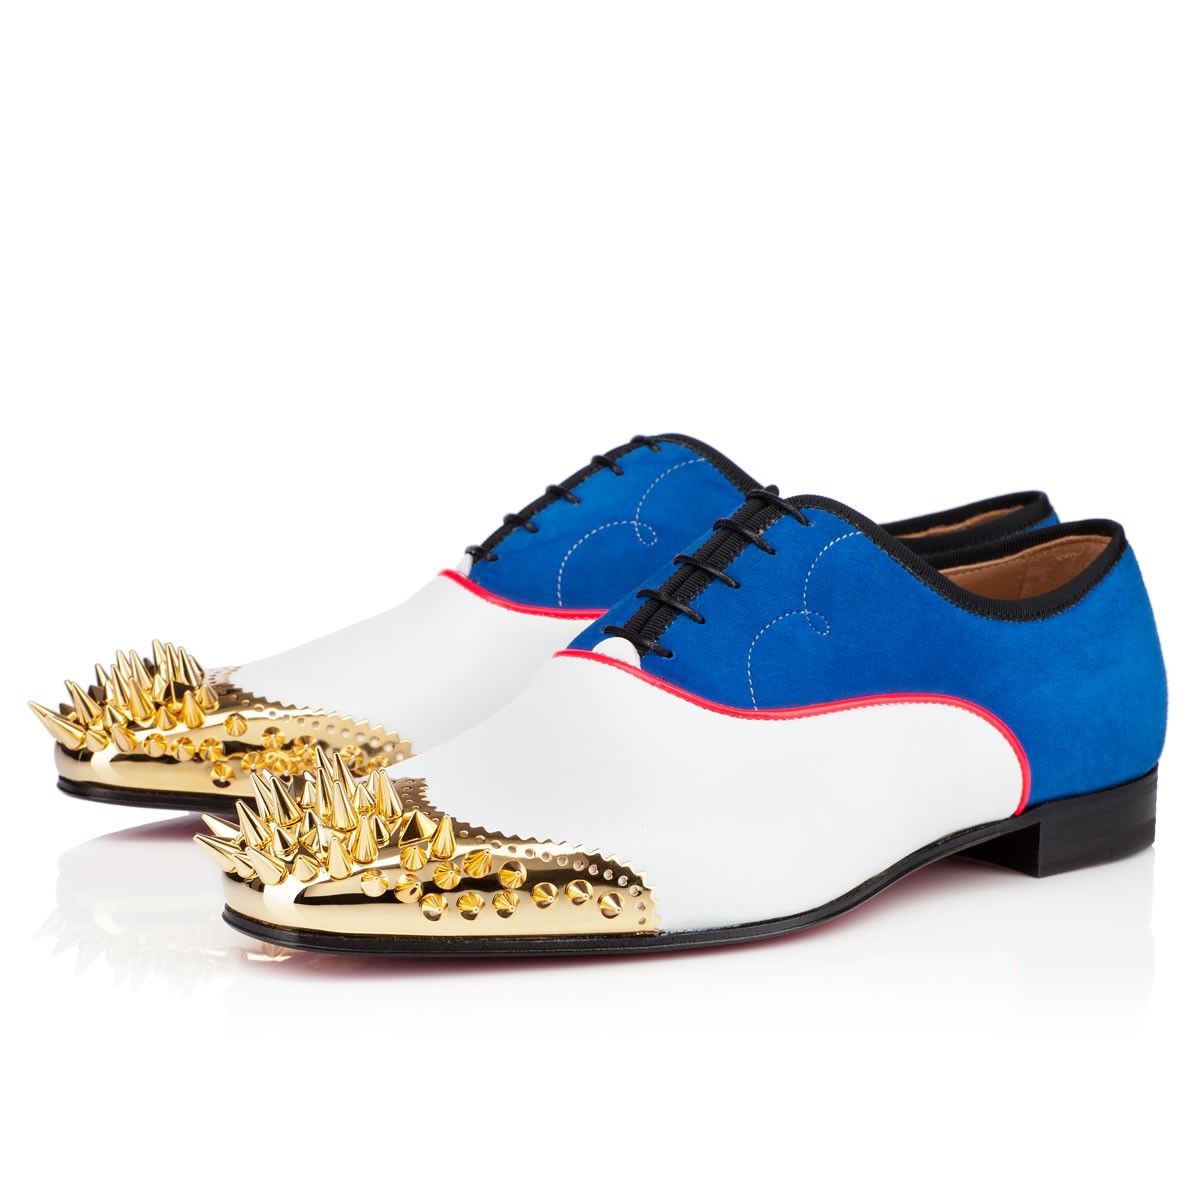 louboutin loafers, mens red bottom tennis shoes